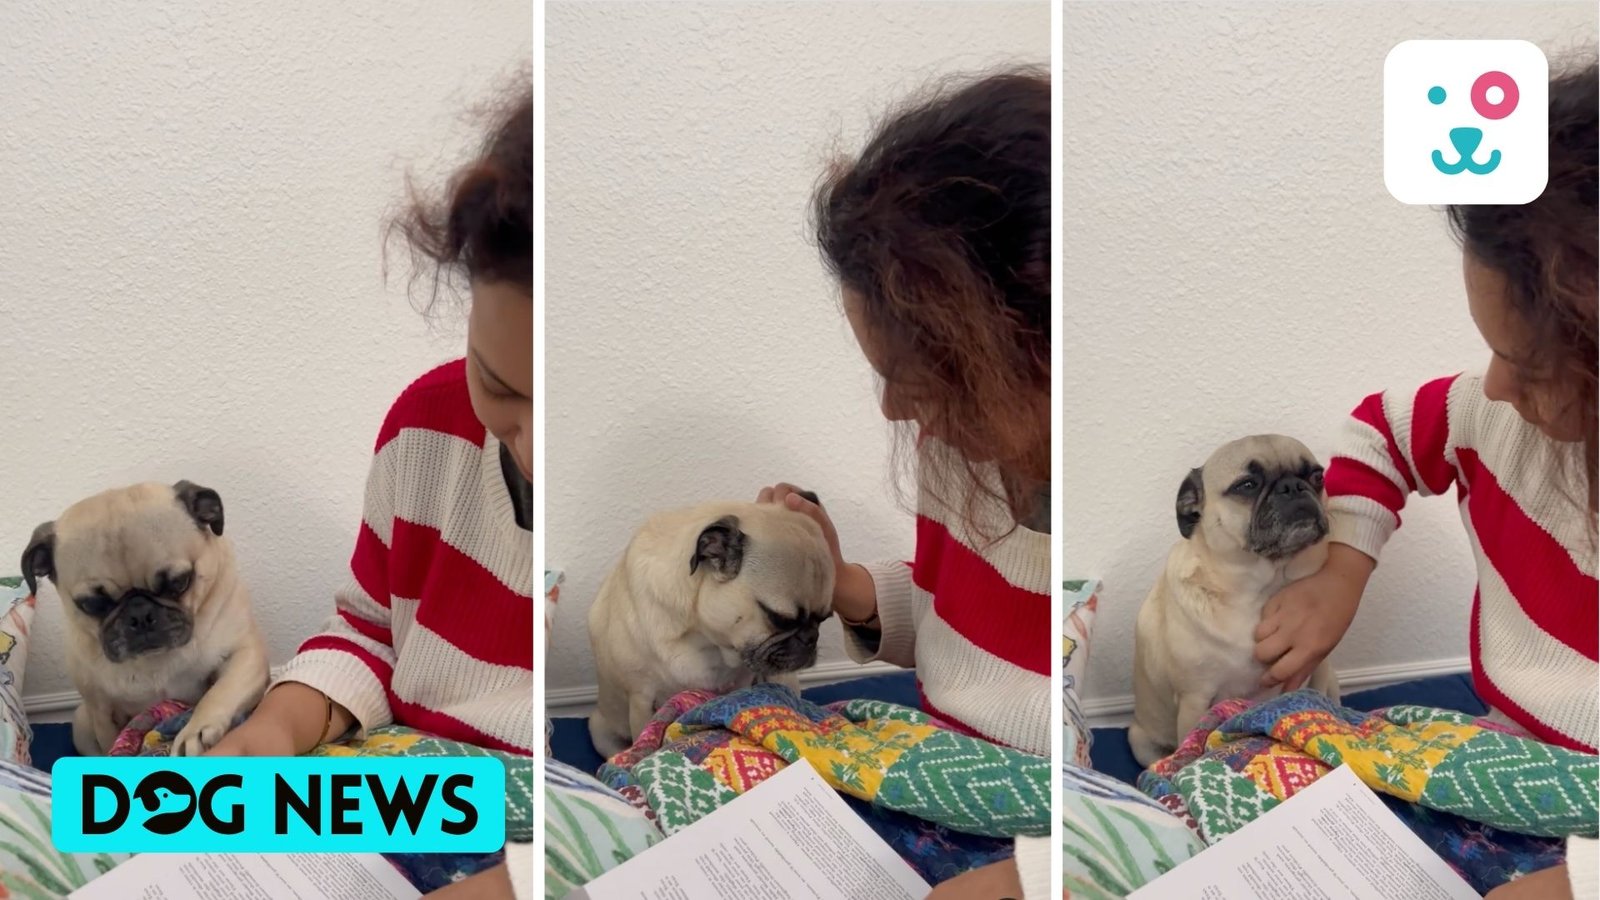 Dog distracts human from studying as it wants to be petted. Watch cute video